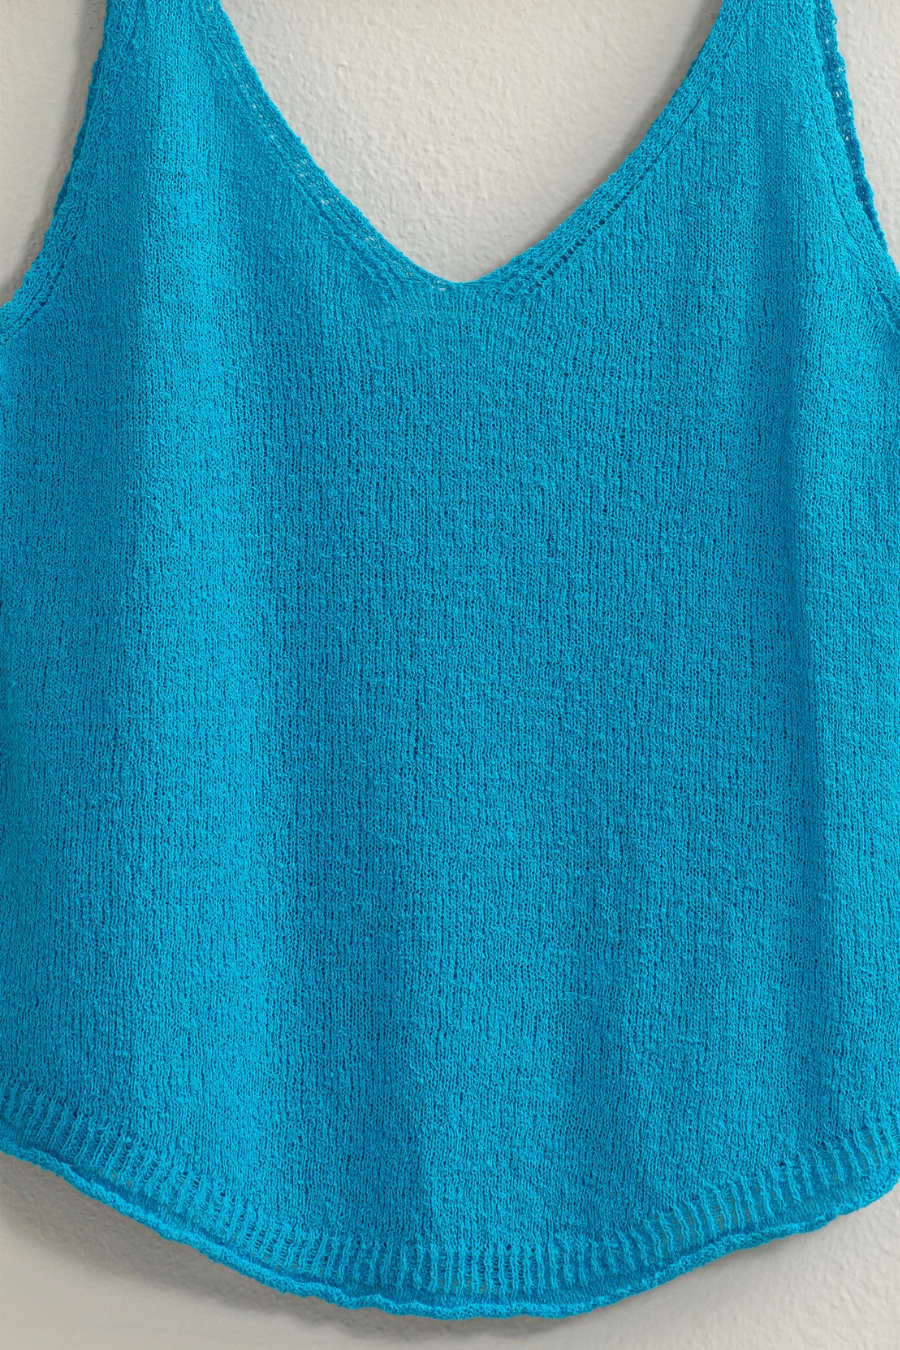 close up of blue knit top